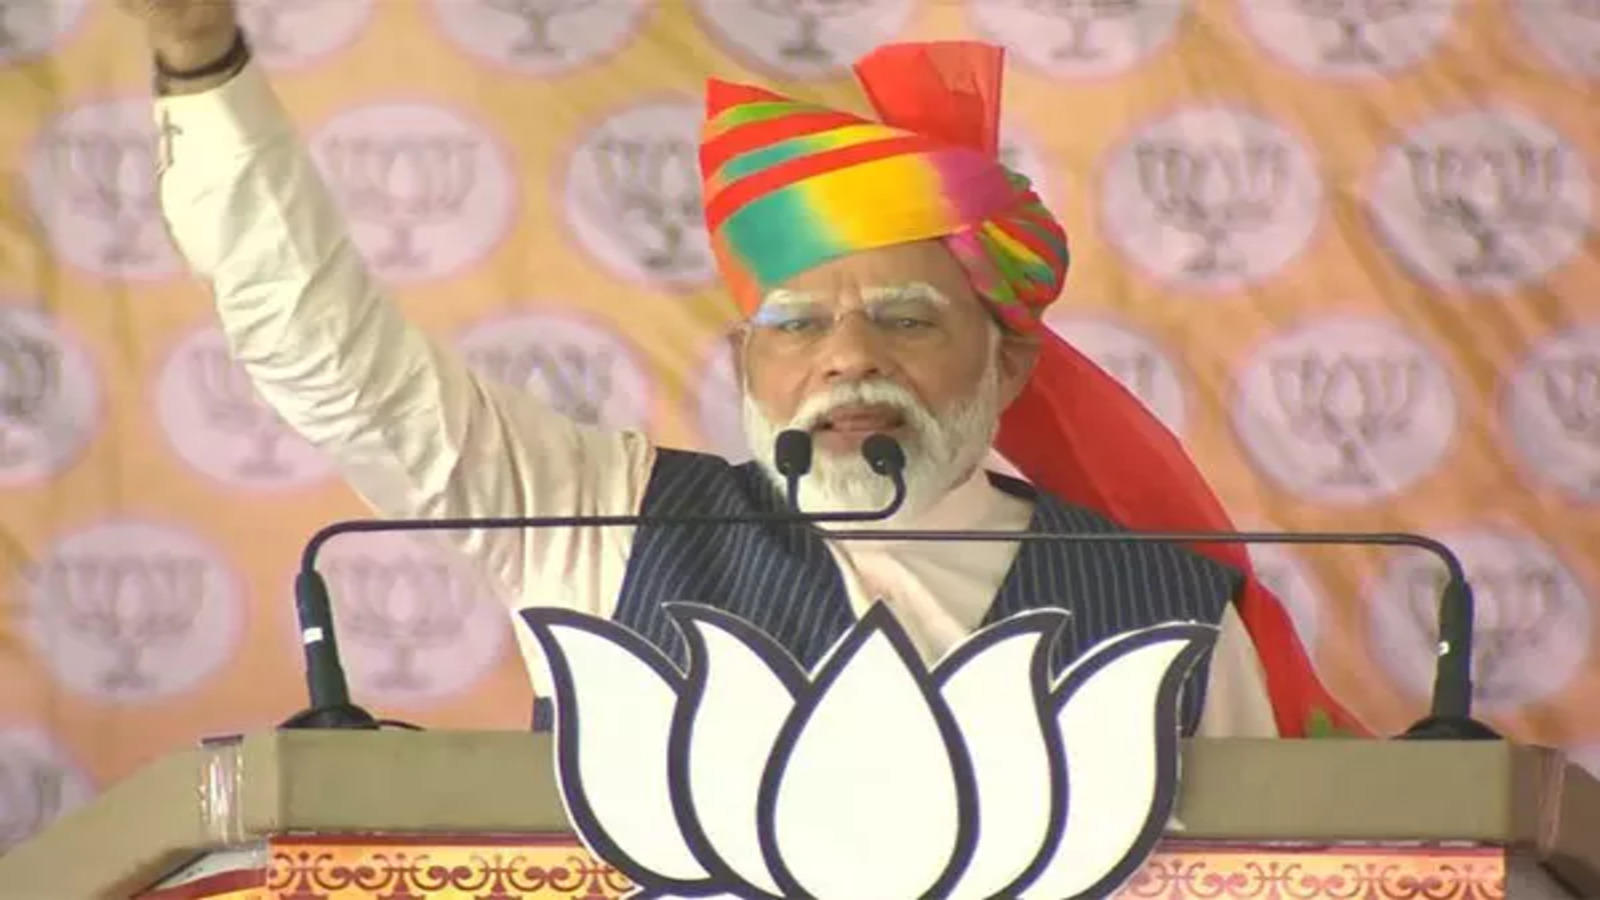 Congress And Its Allies Are Trying To Use Constitution As Weapon For Their Political Benefit: PM Modi